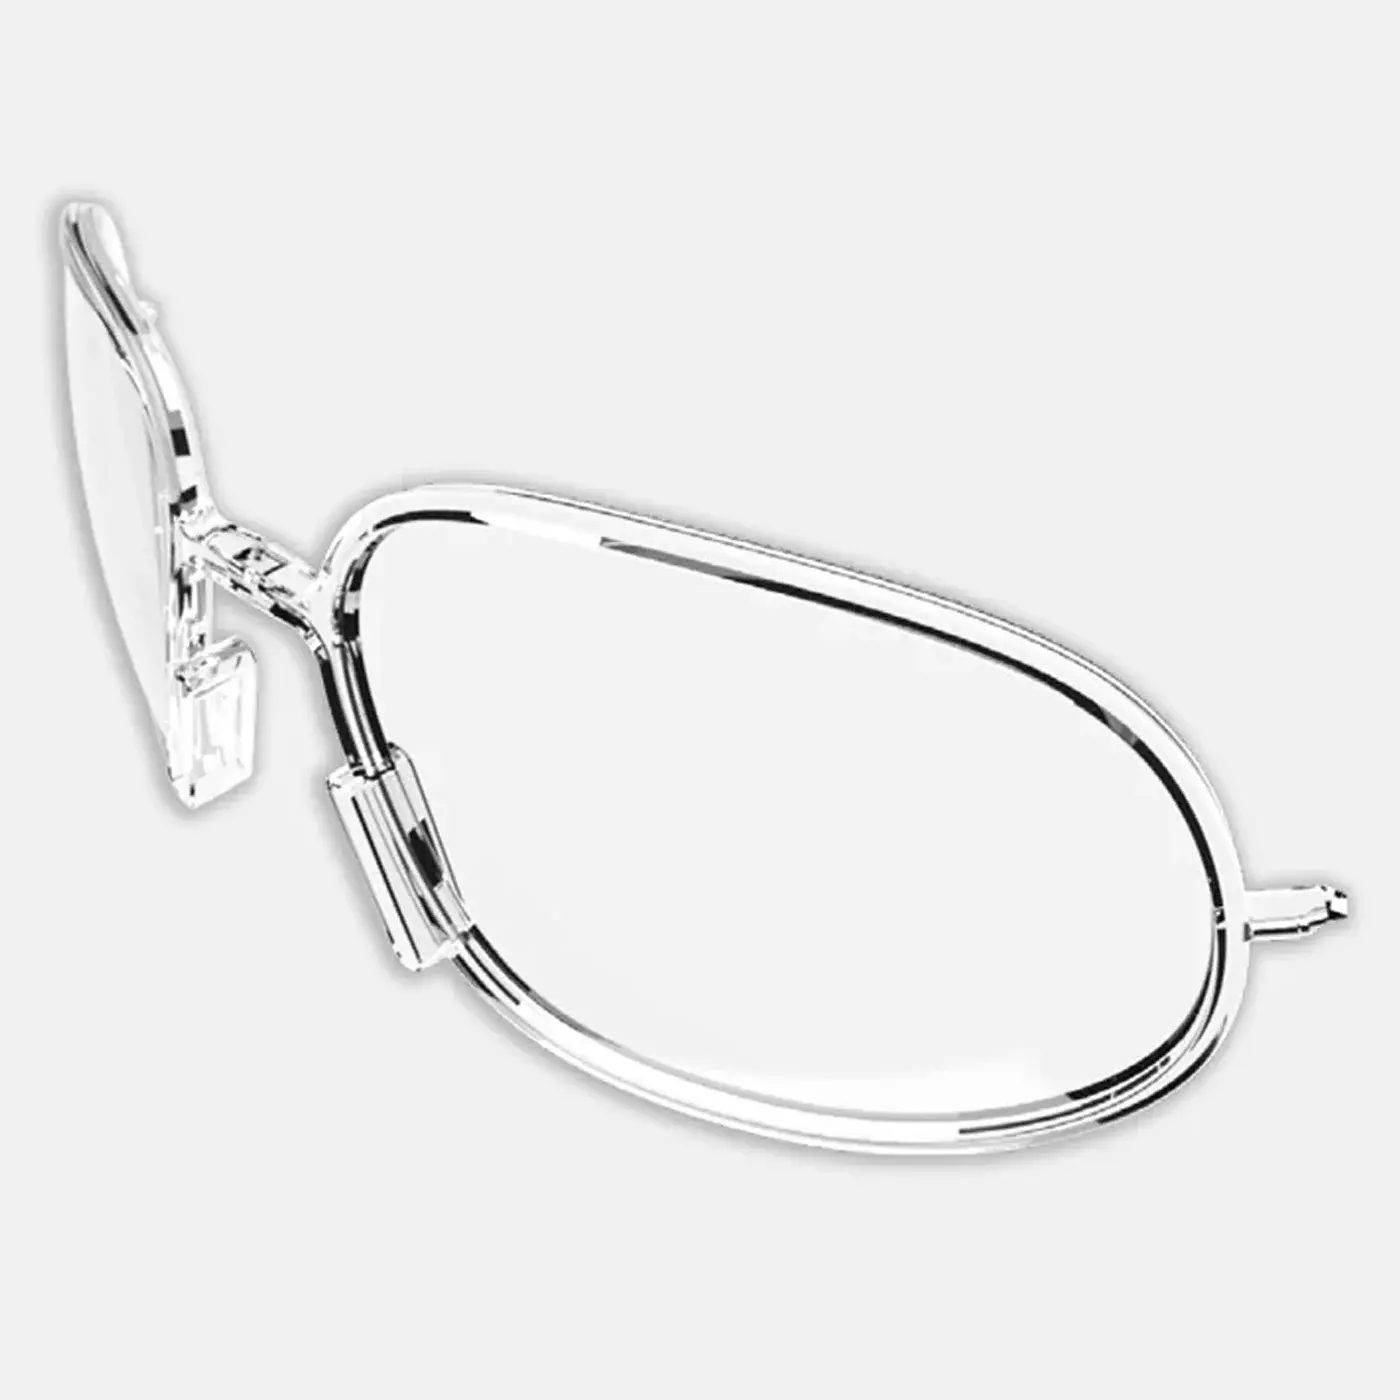 Out Of Optical insert Fietsbril Transparant met Clear Lens